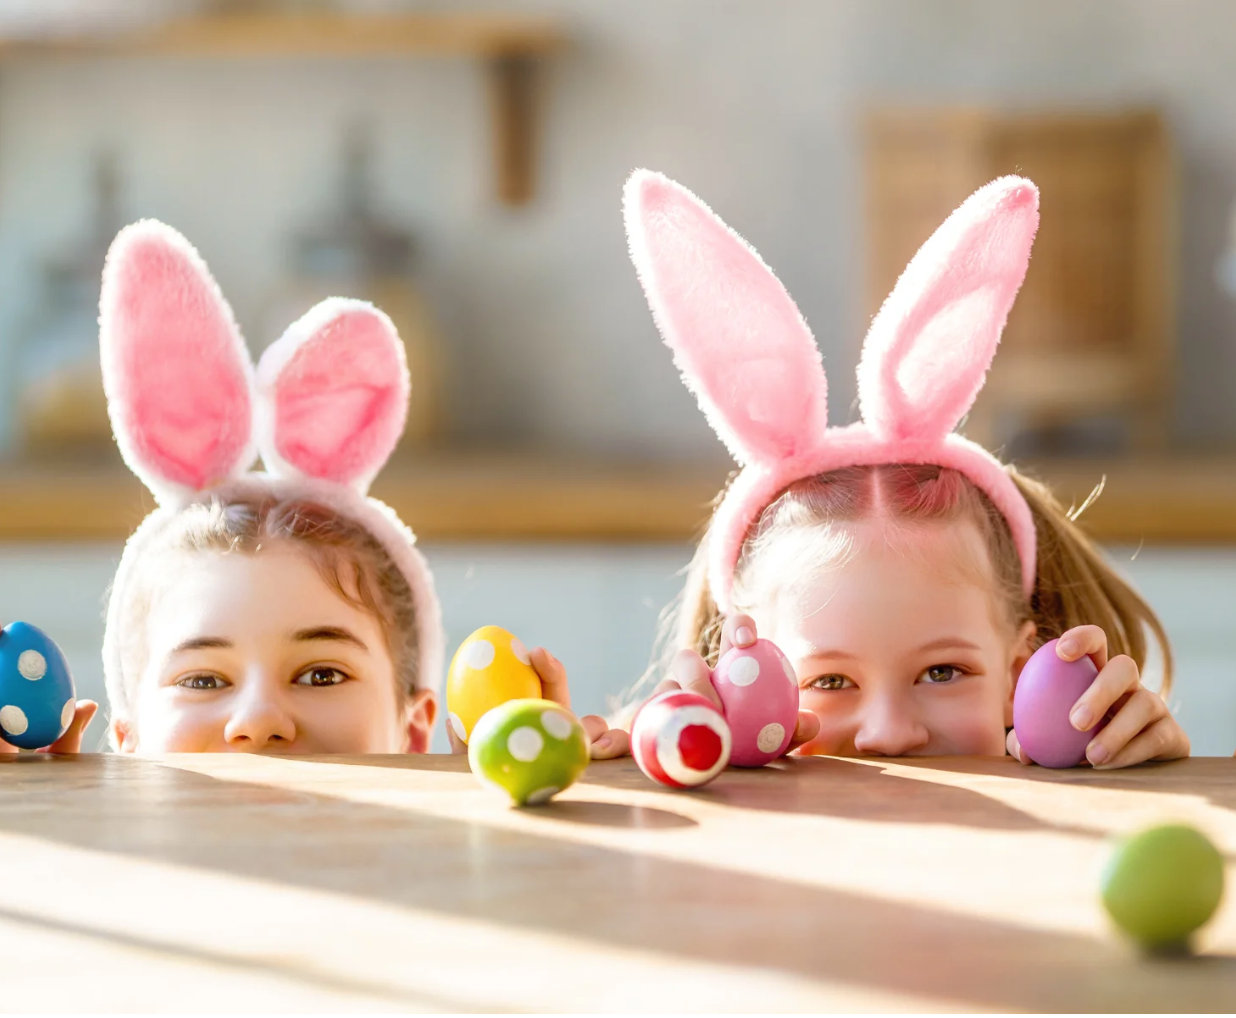 Get the Skinny on Easter Swaps: How to Make Your Basket Healthier Without Losing the Fun